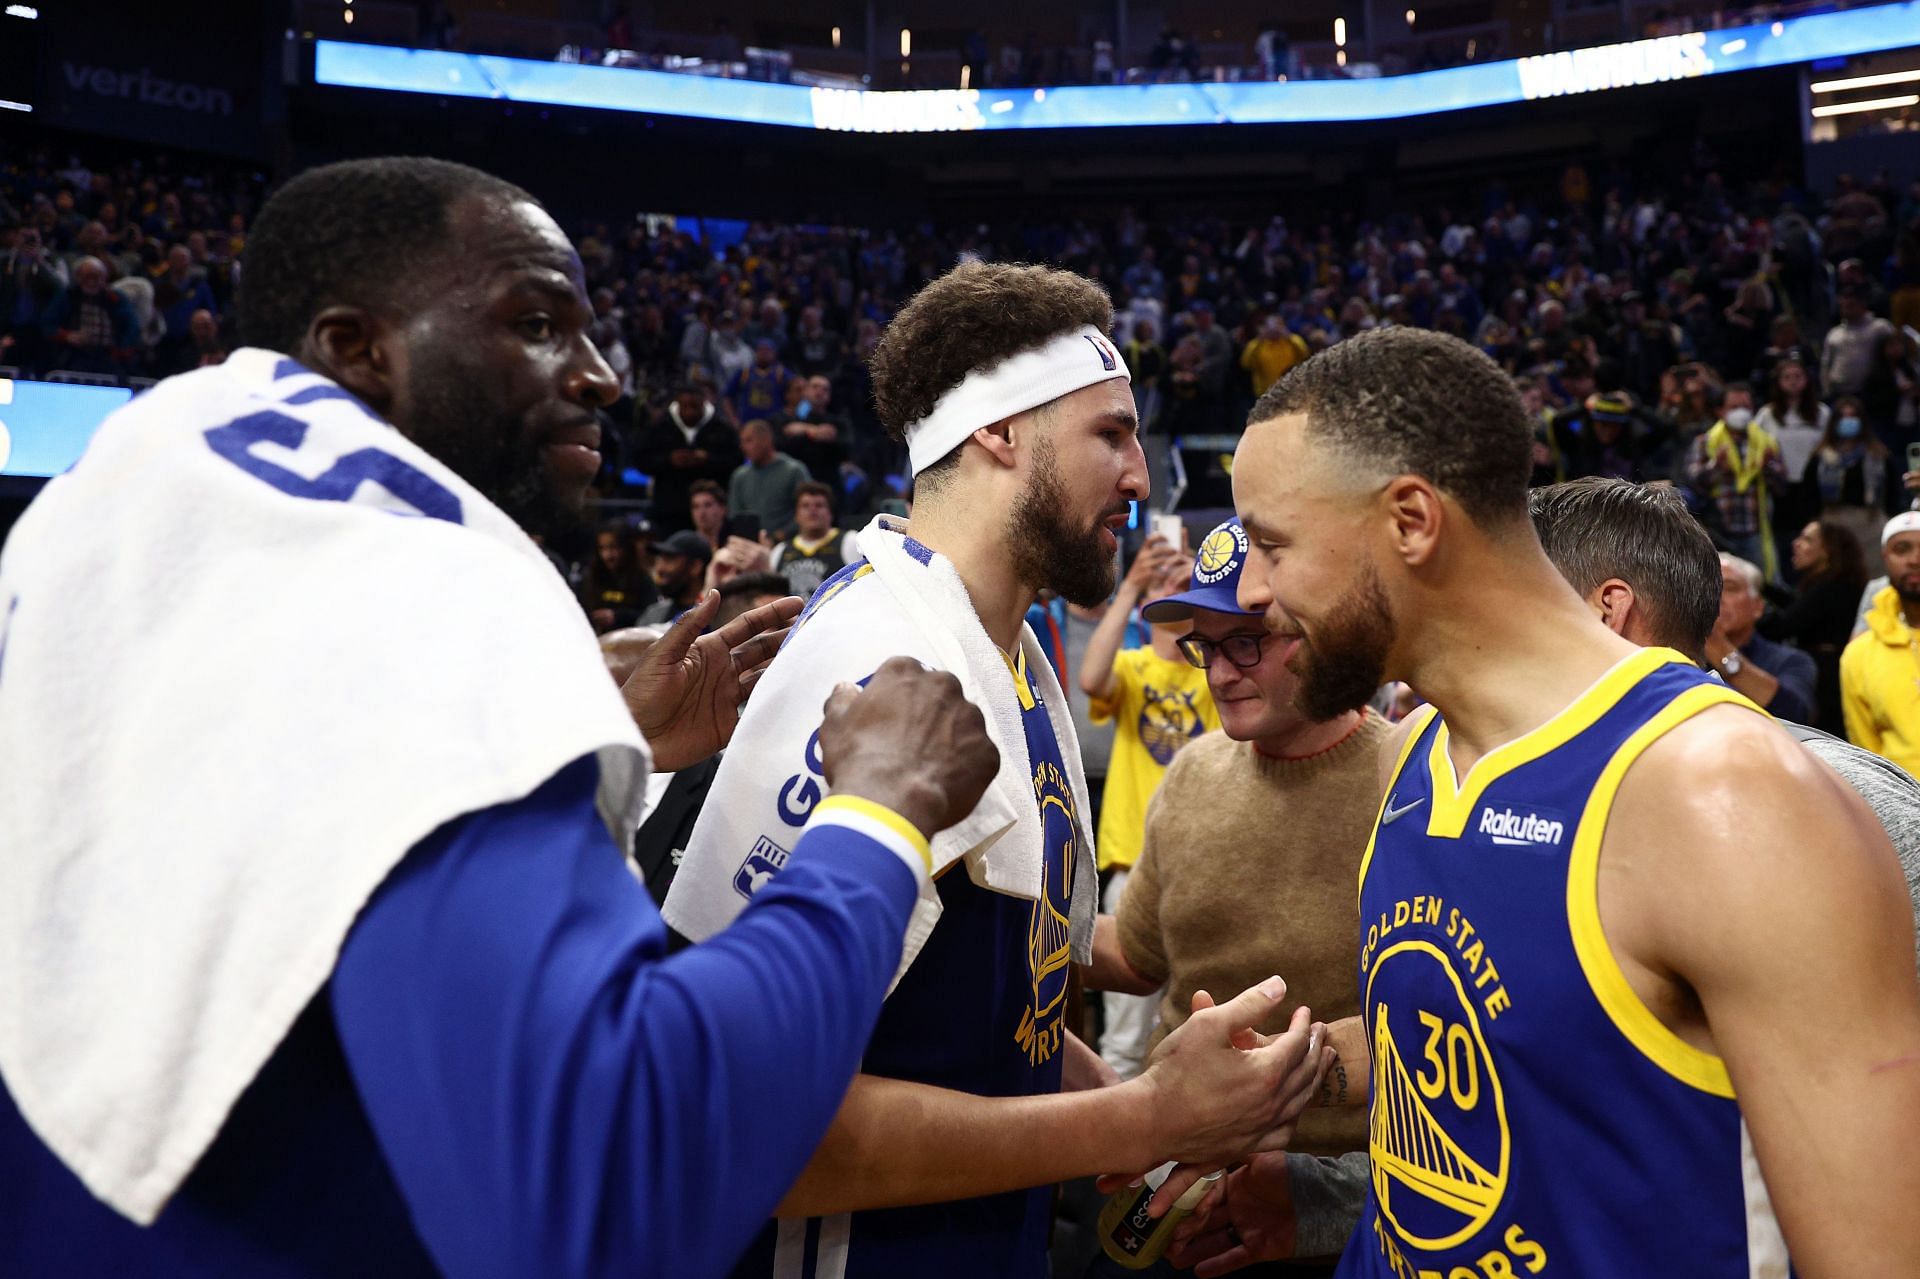 Steph Curry, Klay Thompson and Draymond Green have been in stellar form for the Golden State Warriors in the playoffs.